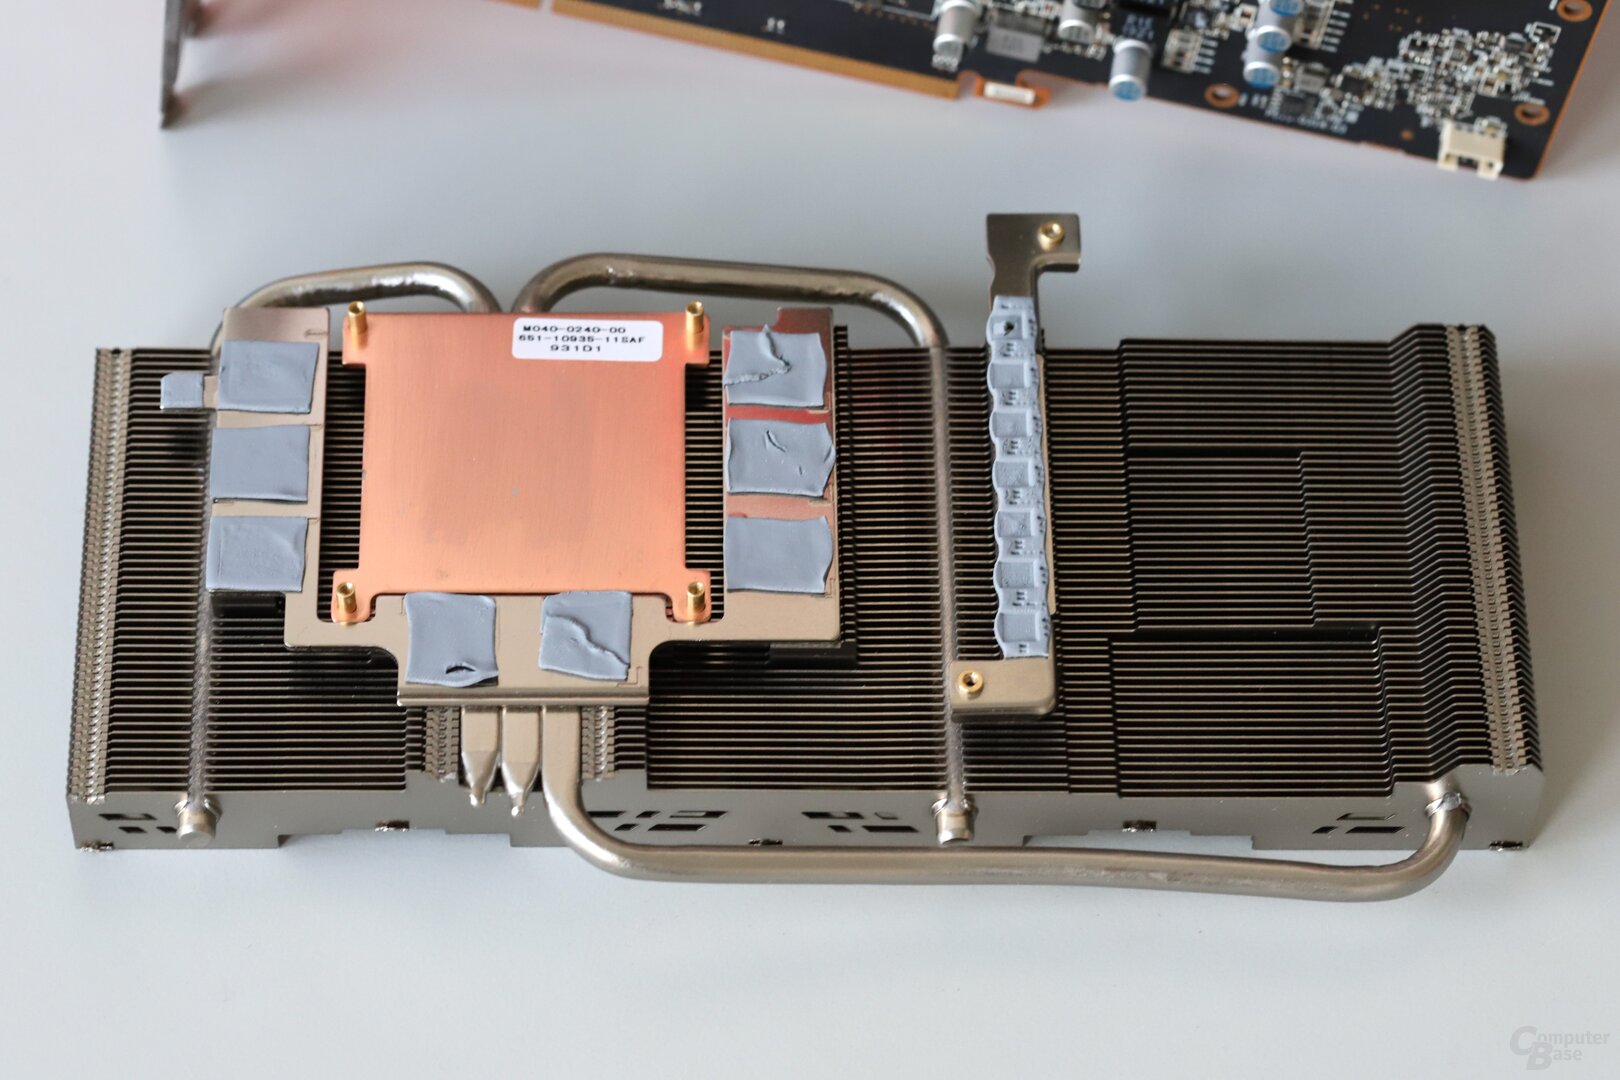 The cooling system of the non-XT version with copper base plate and three heat pipes